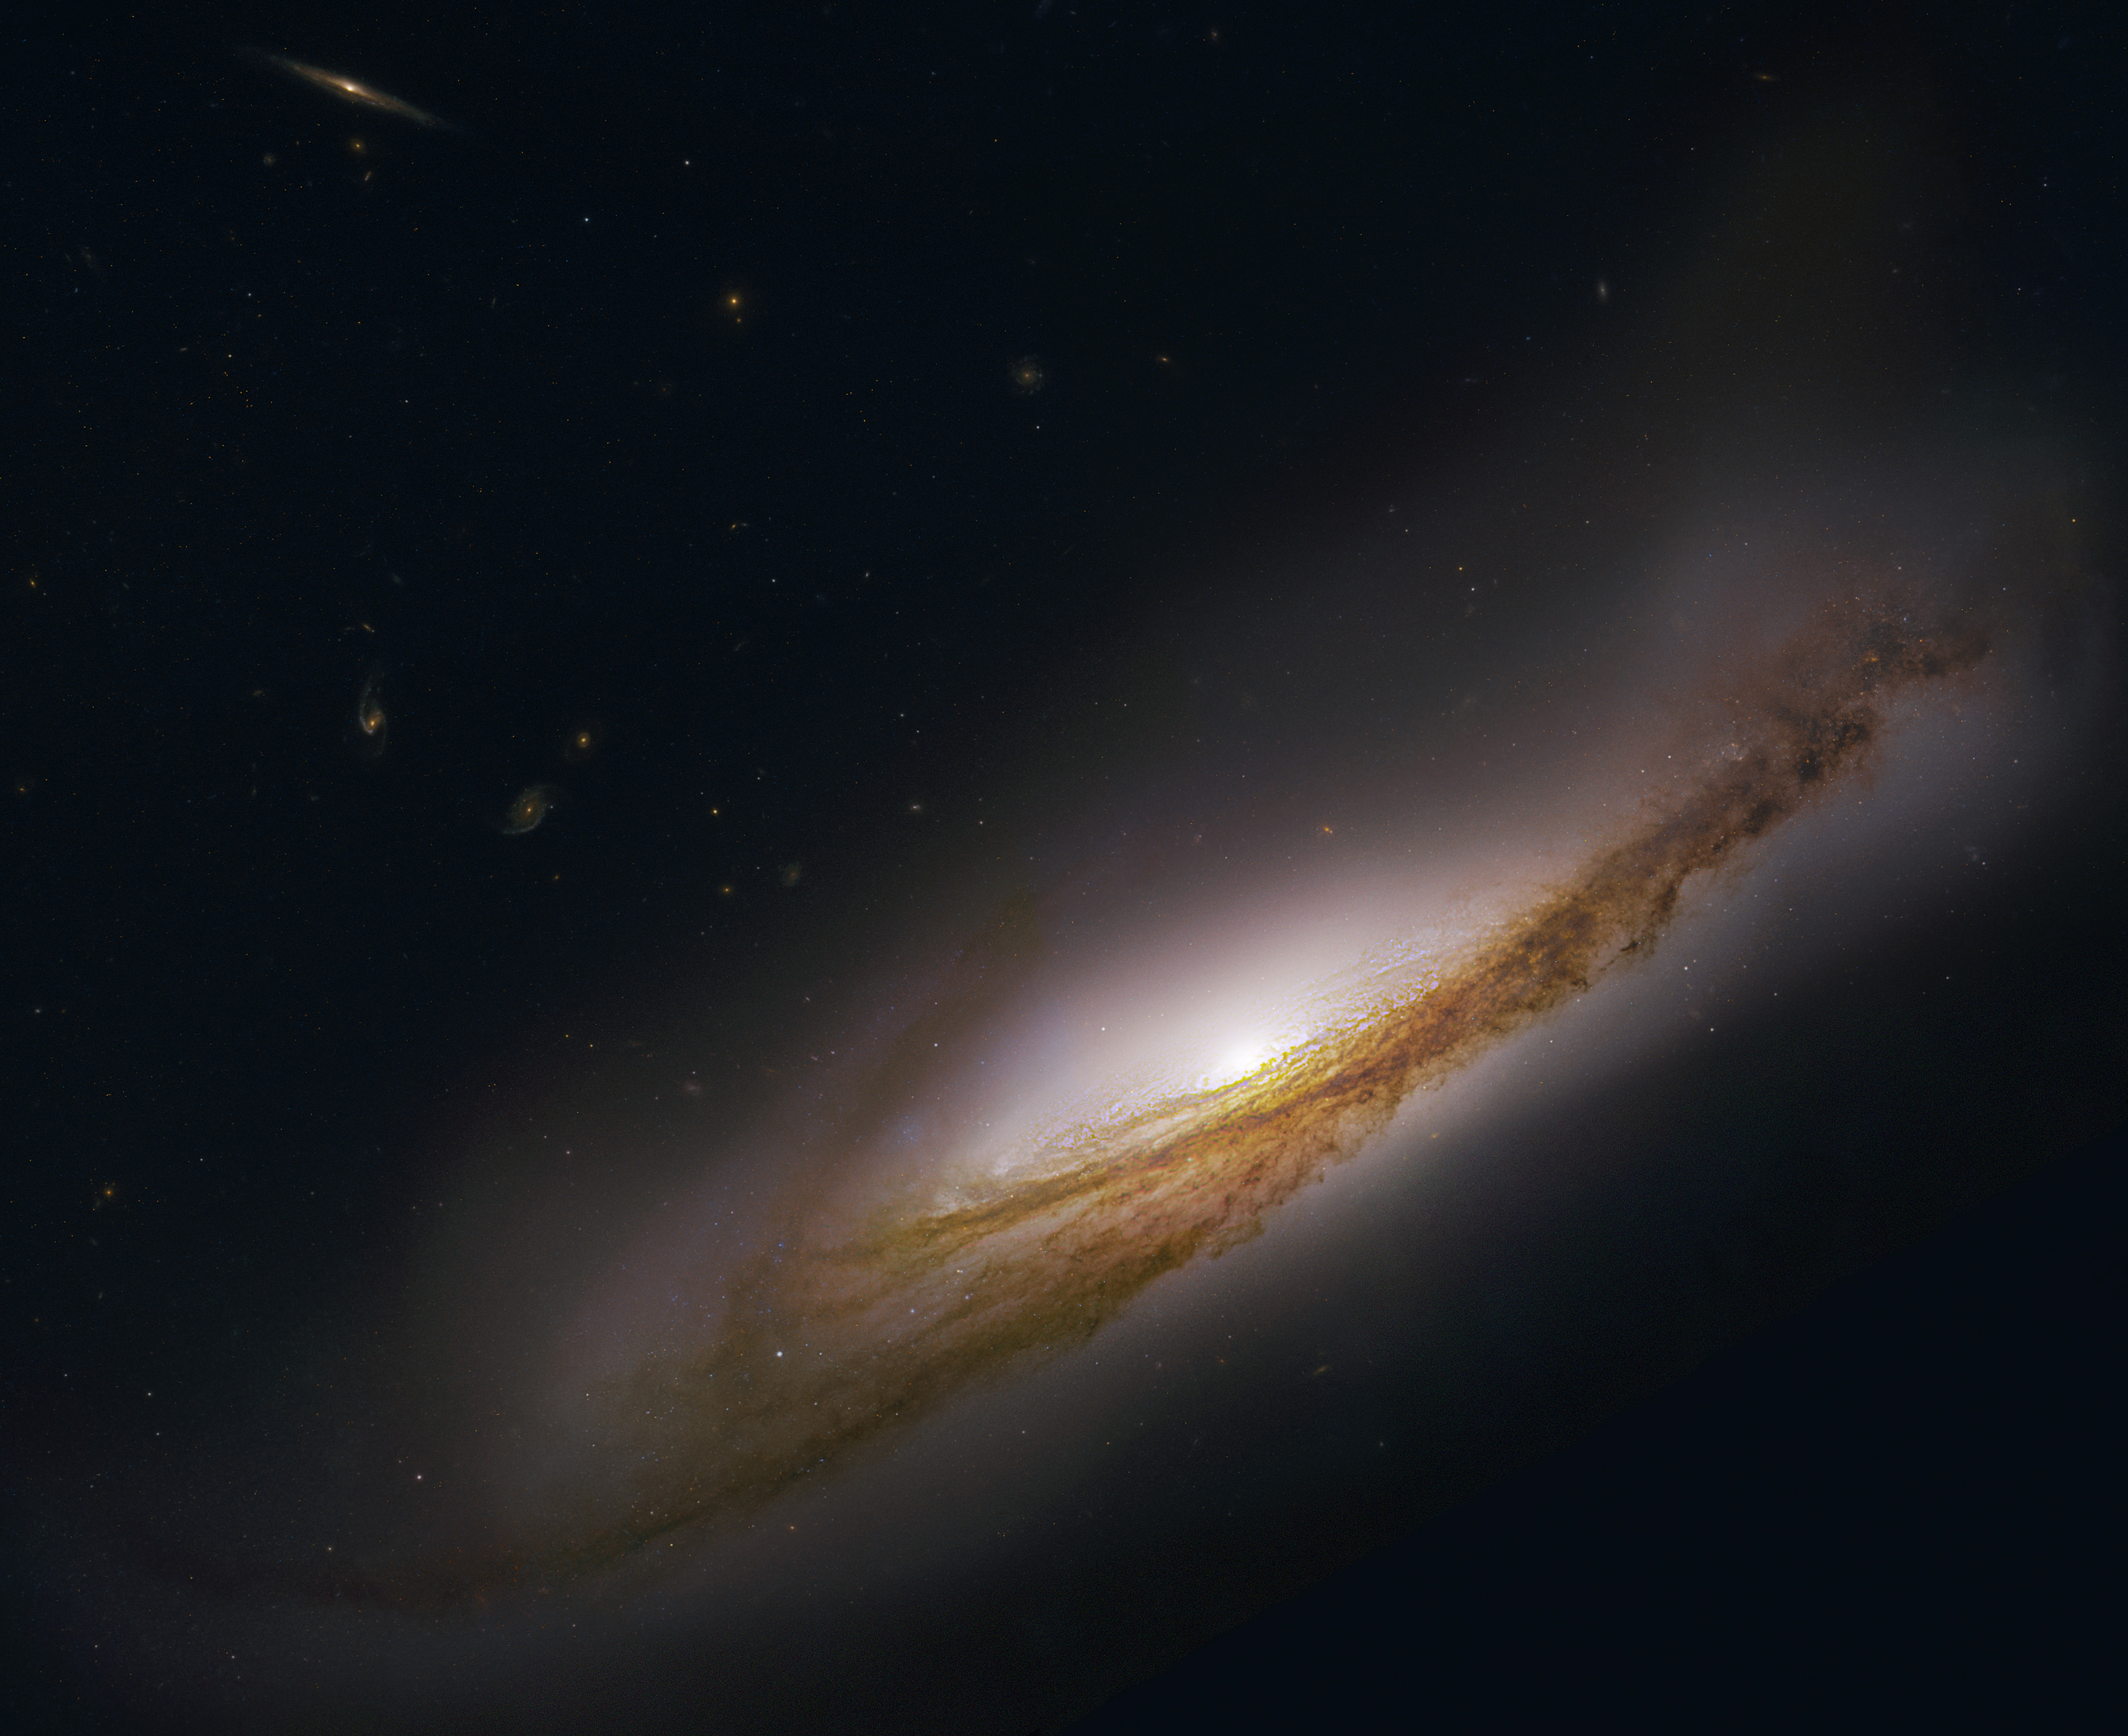 Apple Erases Another Few Galaxies For Mountain Lion Wallpaper